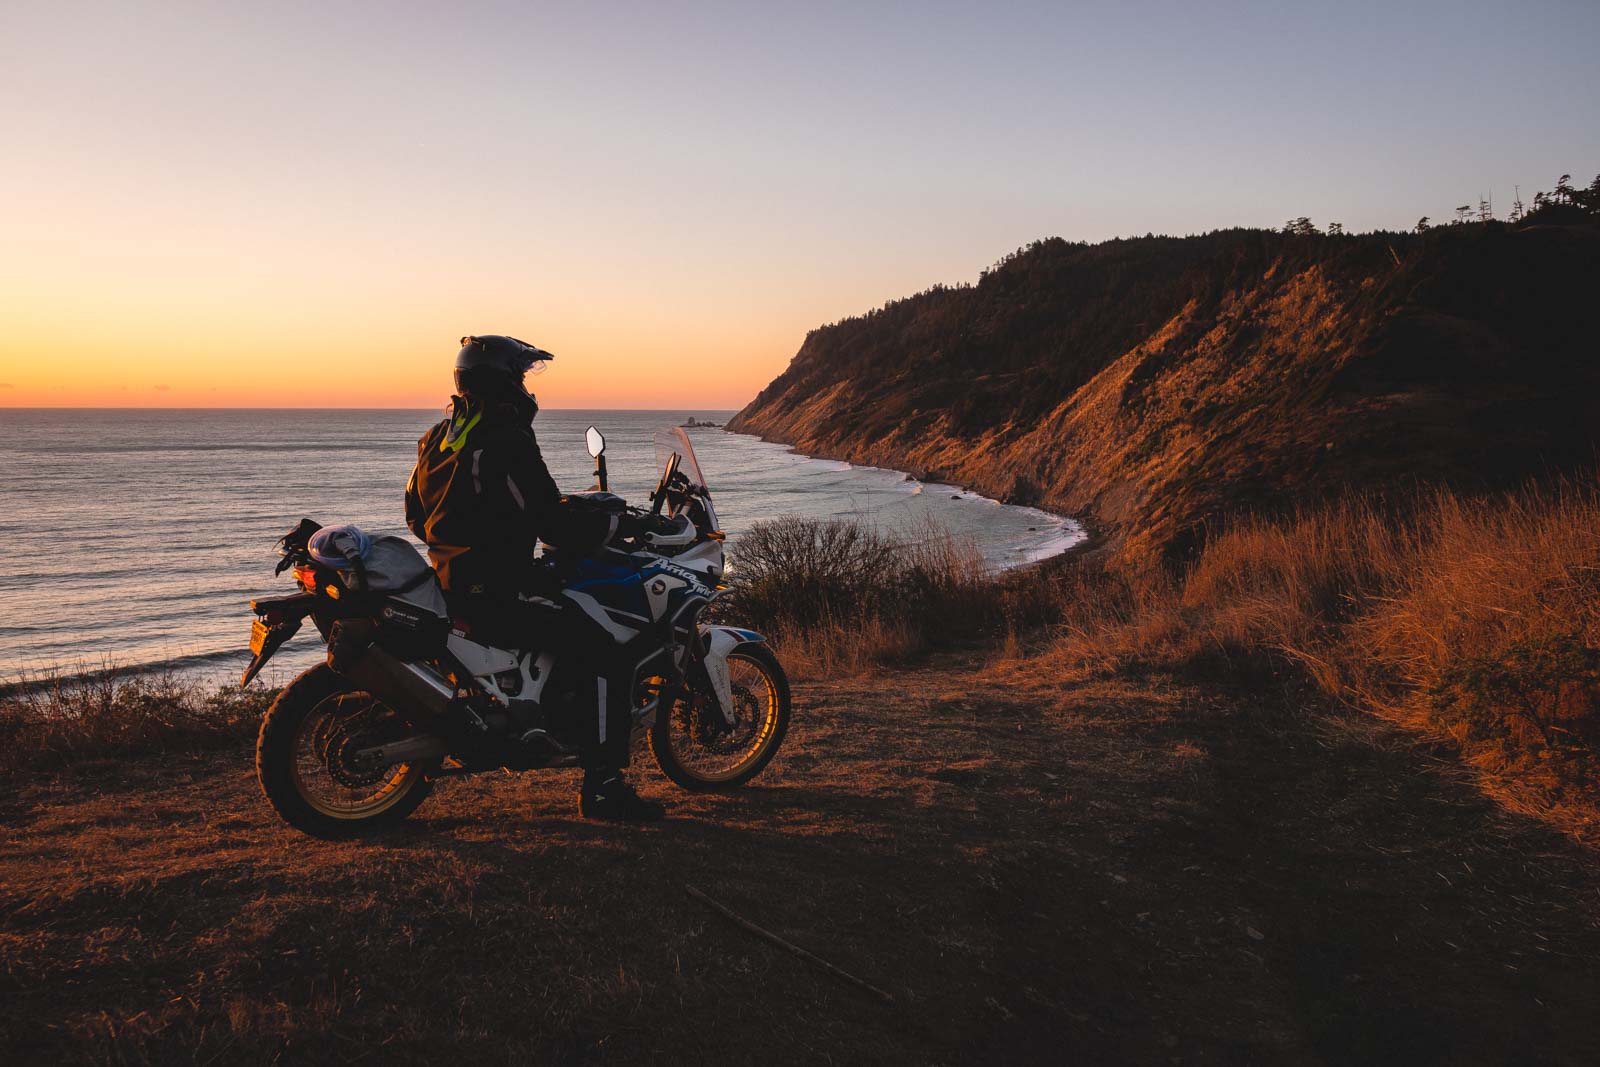 riding-along-the-pacific-coast-highway-offroad-adventure-motorcycle-tour